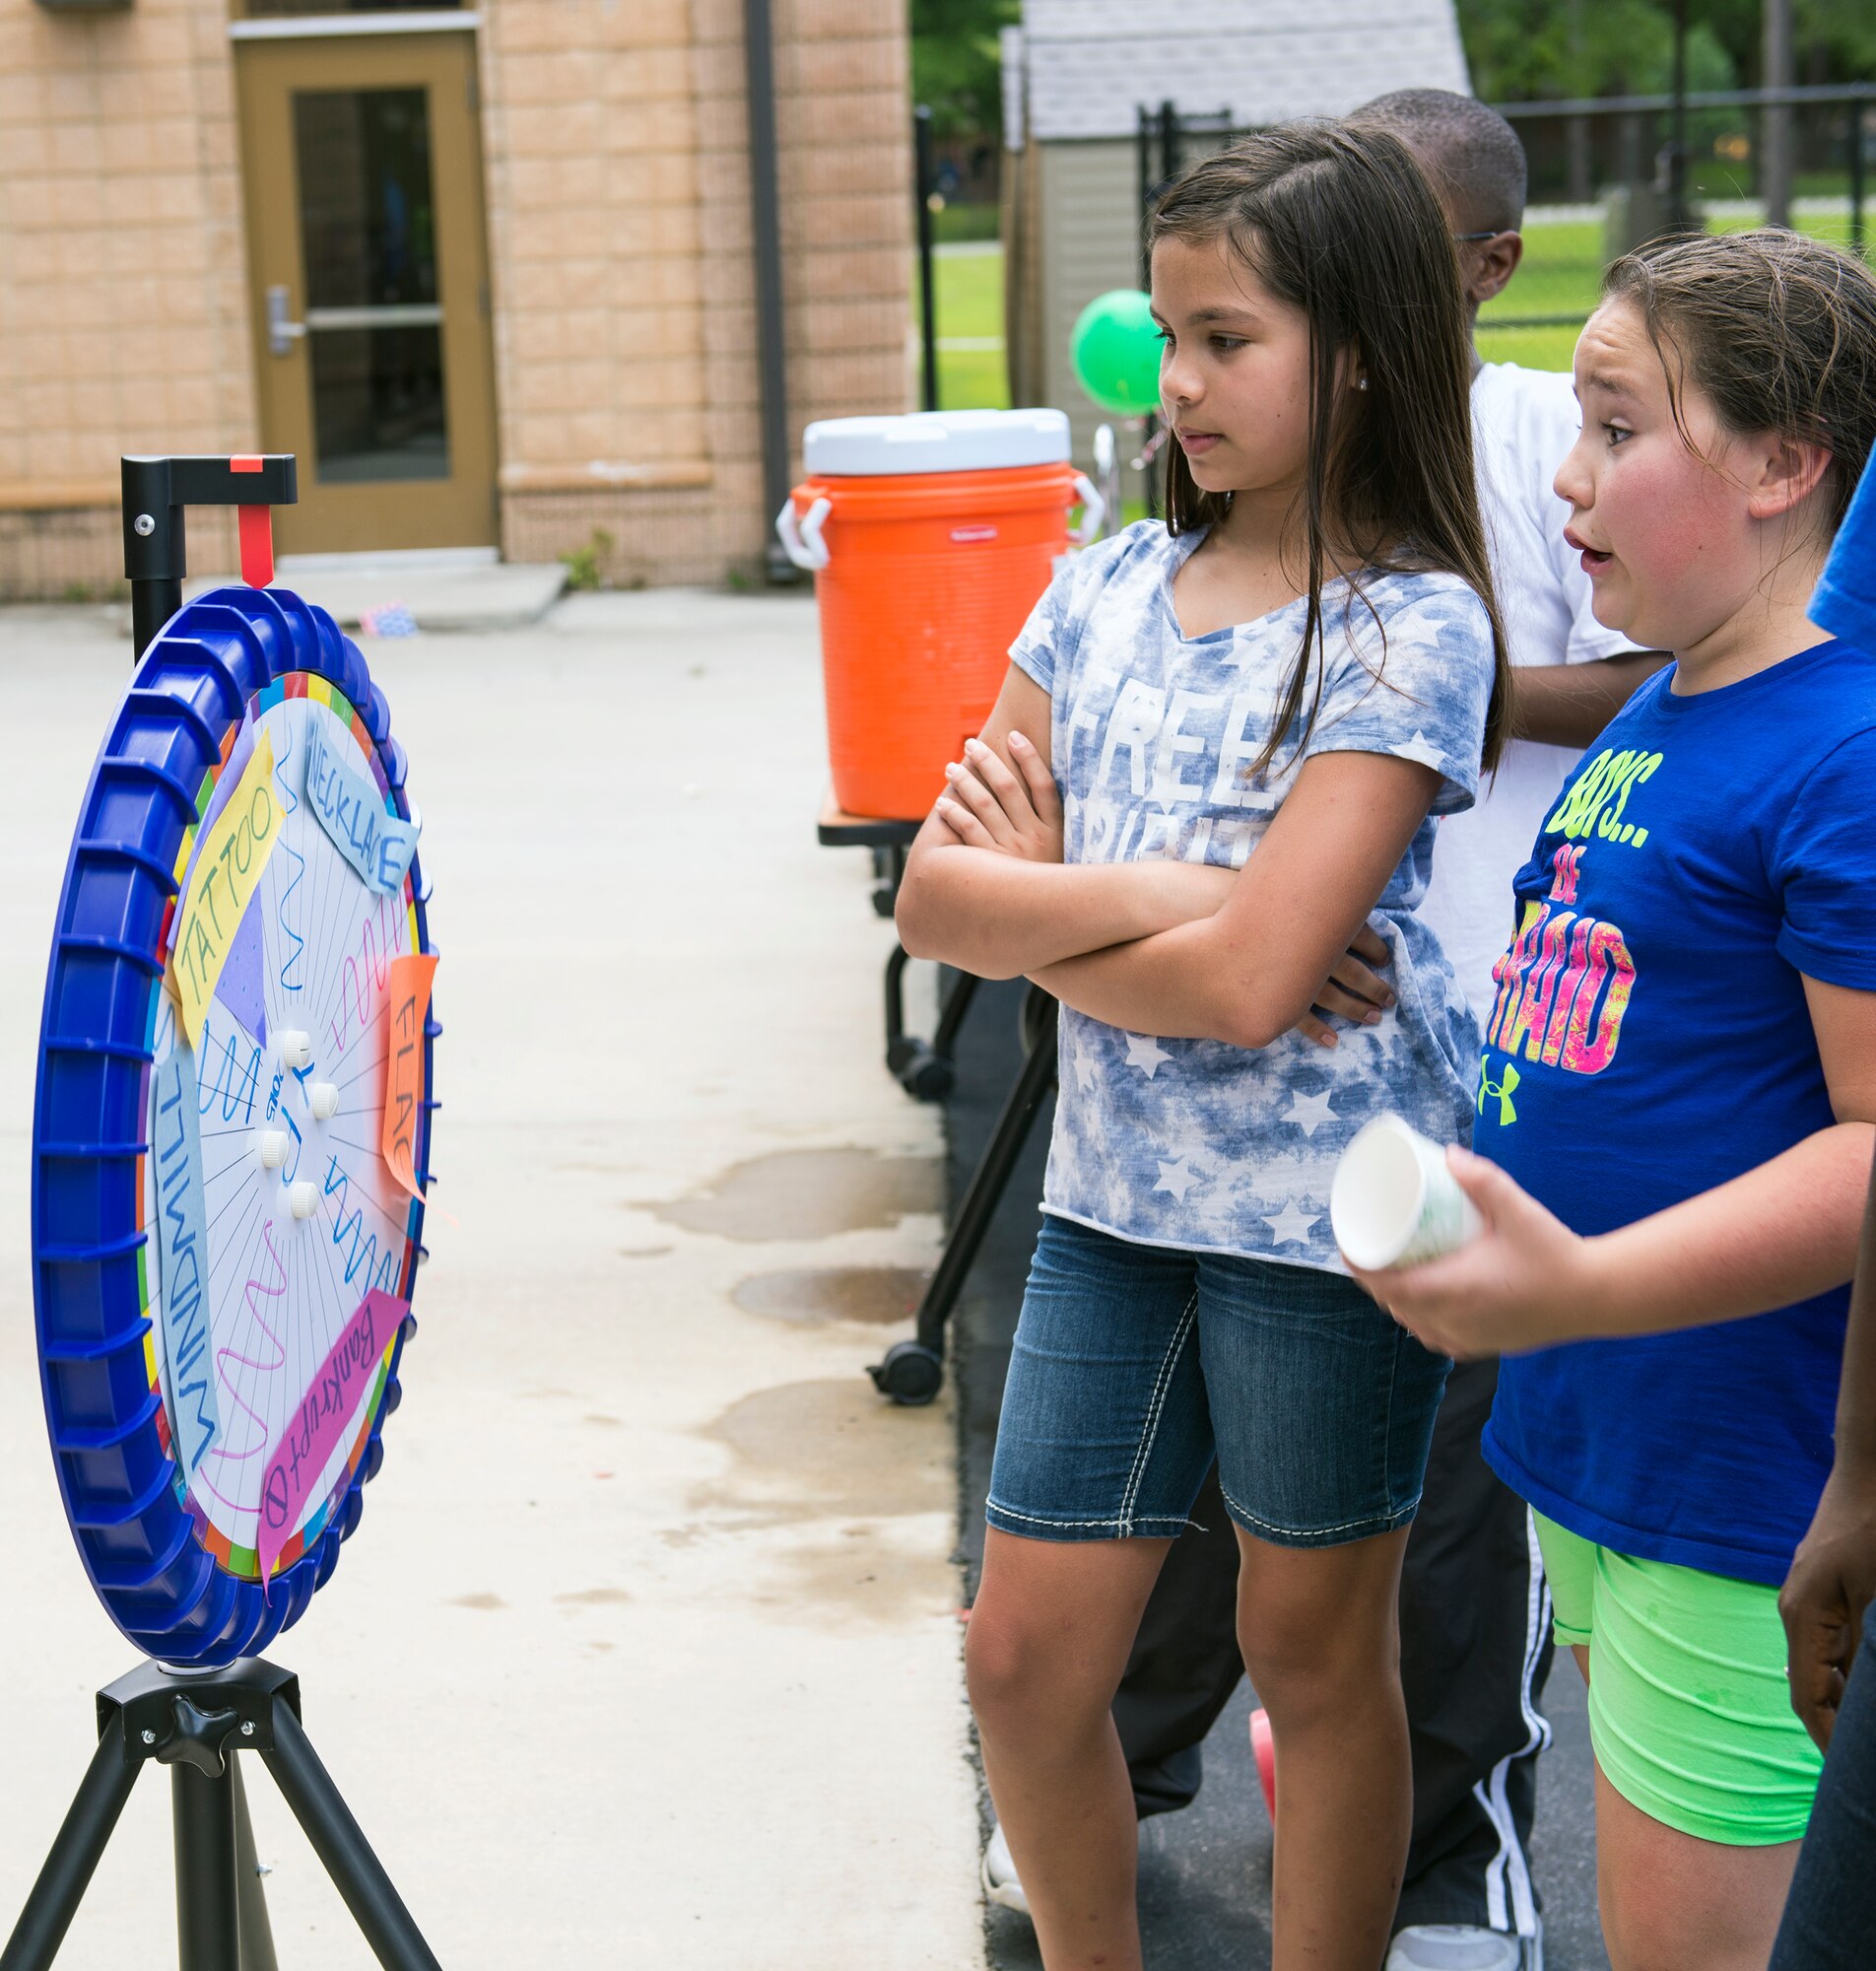 Isabella Shrader, left, daughter of U.S. Air Force Senior Master Sgt. Kimberly Waldrop, 23d Equipment Maintenance Squadron, waits for a prize wheel to stop during the July Jamboree, July 6, 2015, at Moody Air Force Base, Ga. Participants won prizes consisting of tattoos, necklaces, windmills, and flags. (U.S. Air Force photo by Airman Greg Nash/Released)